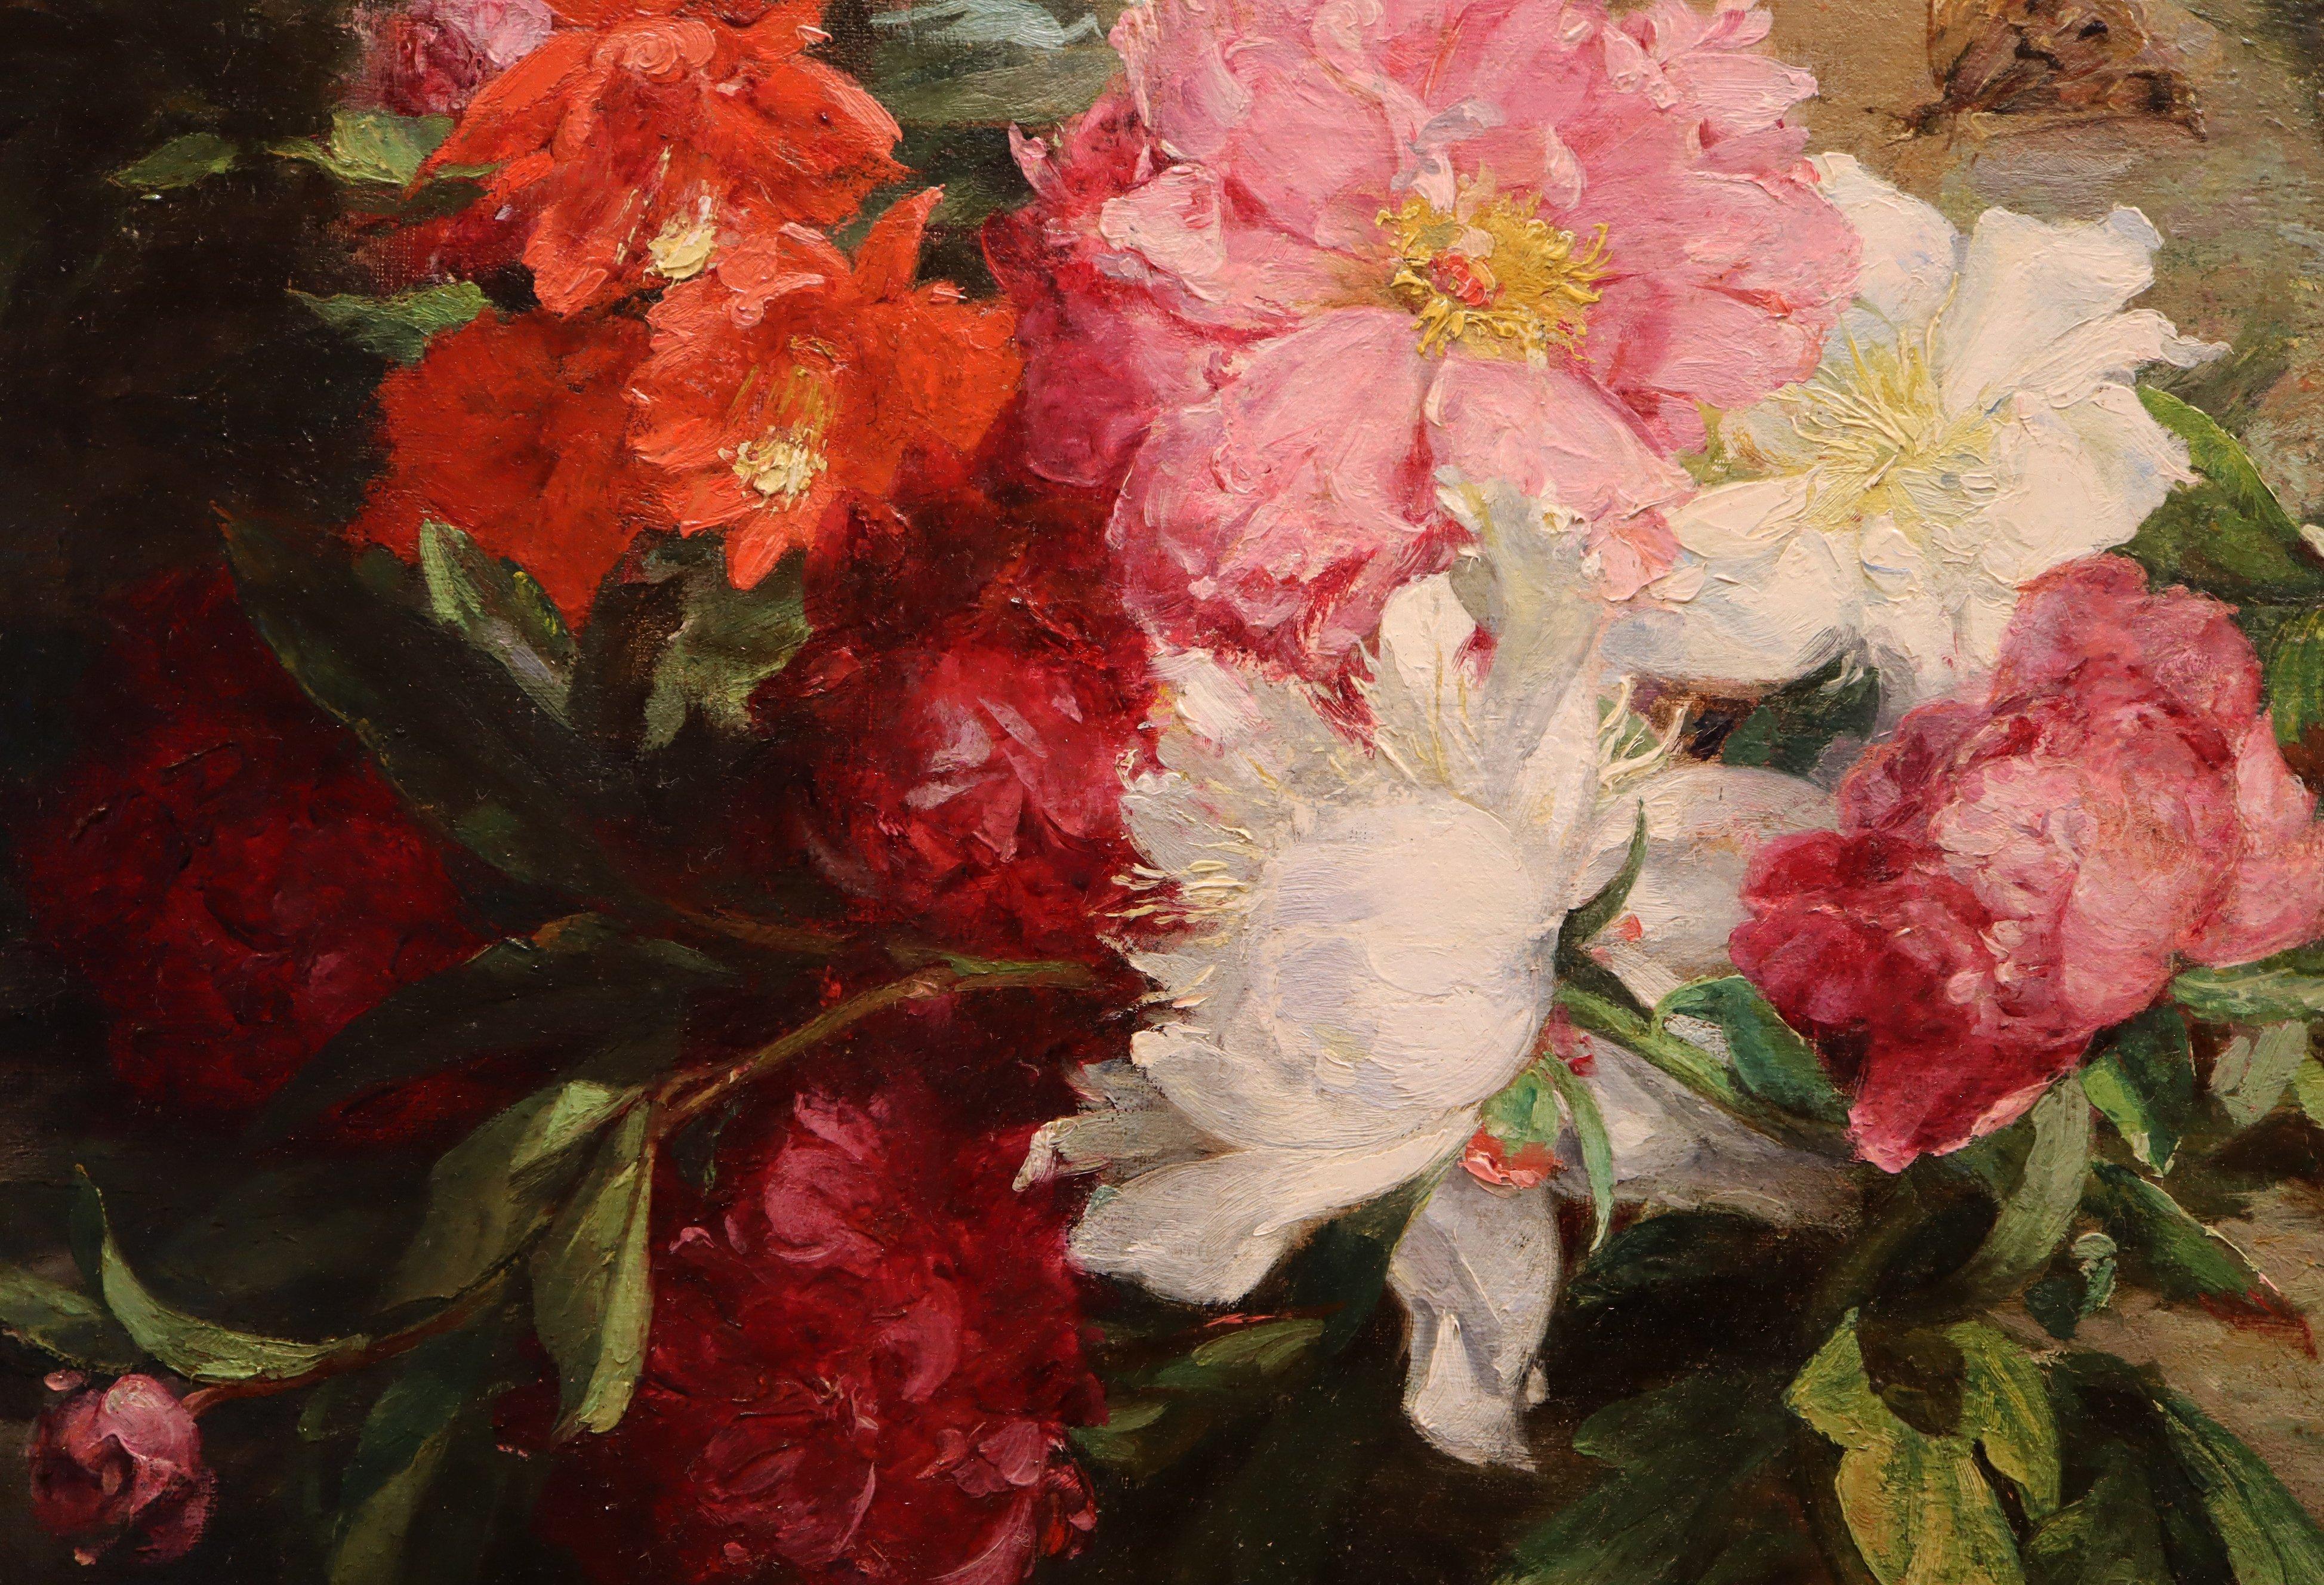 This painting from 1870s depicts spring flowers in disarray on a stone doorway. It is an example of the artist's effort of finding a new way to depict flowers which is far removed from the traditional staged manner.

This Grivolas painting